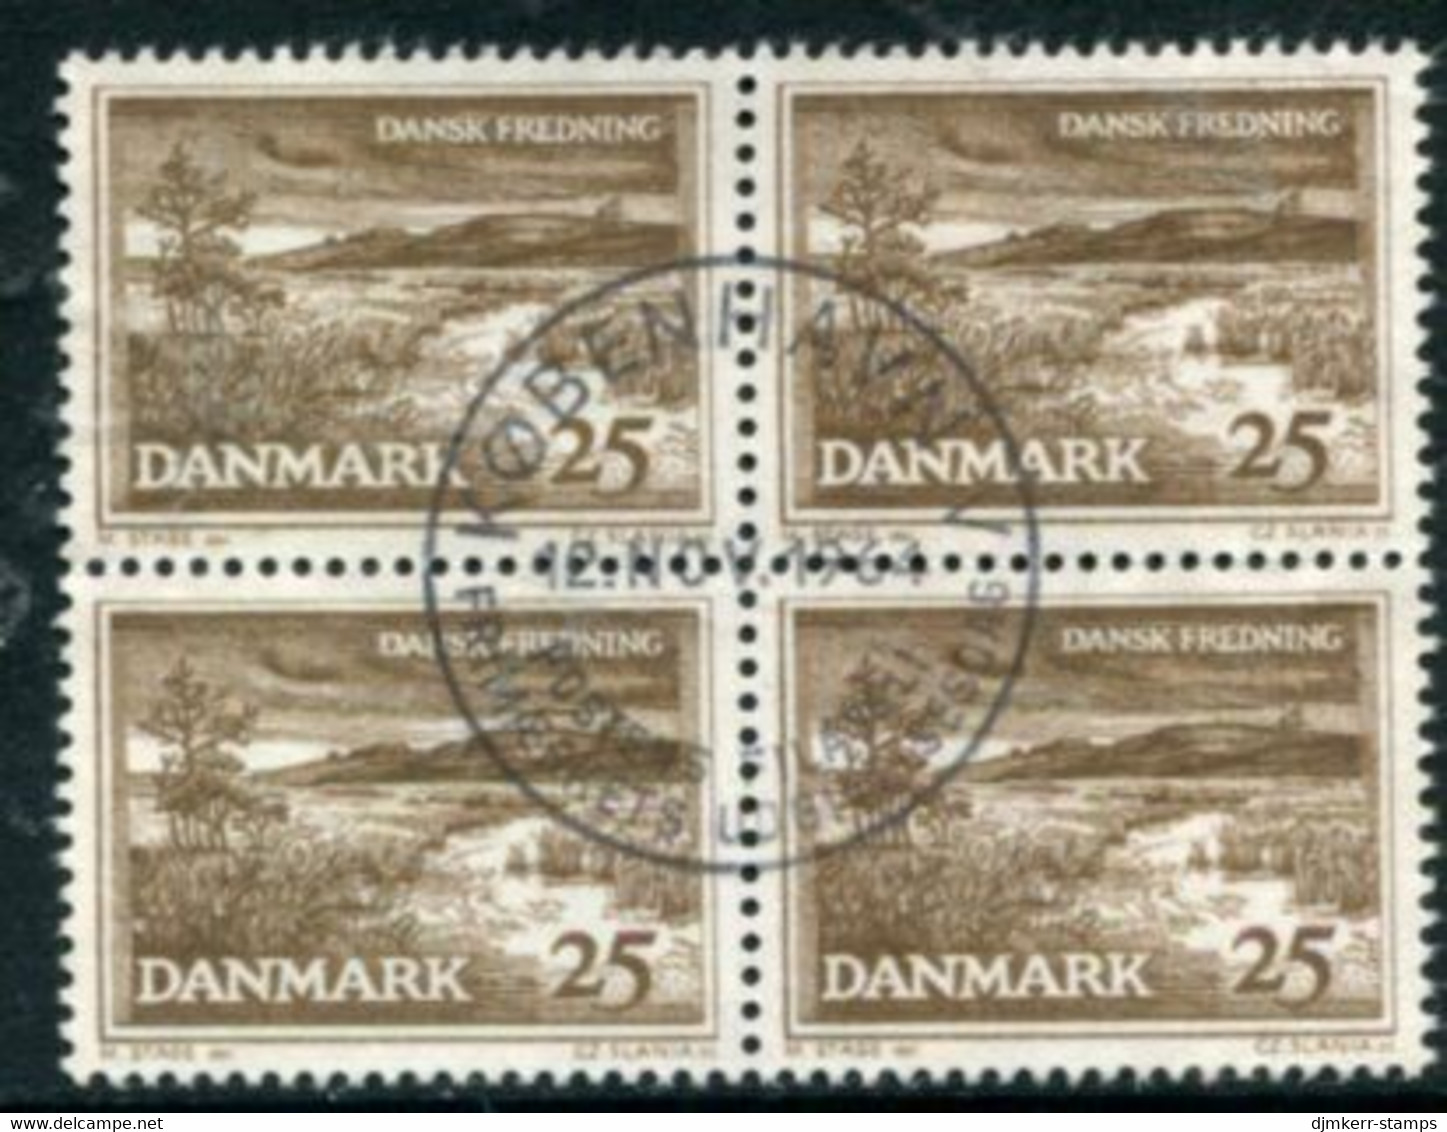 DENMARK 1964 Nature And Monument Protection Block Of 4 Used   Michel 425x - Oblitérés